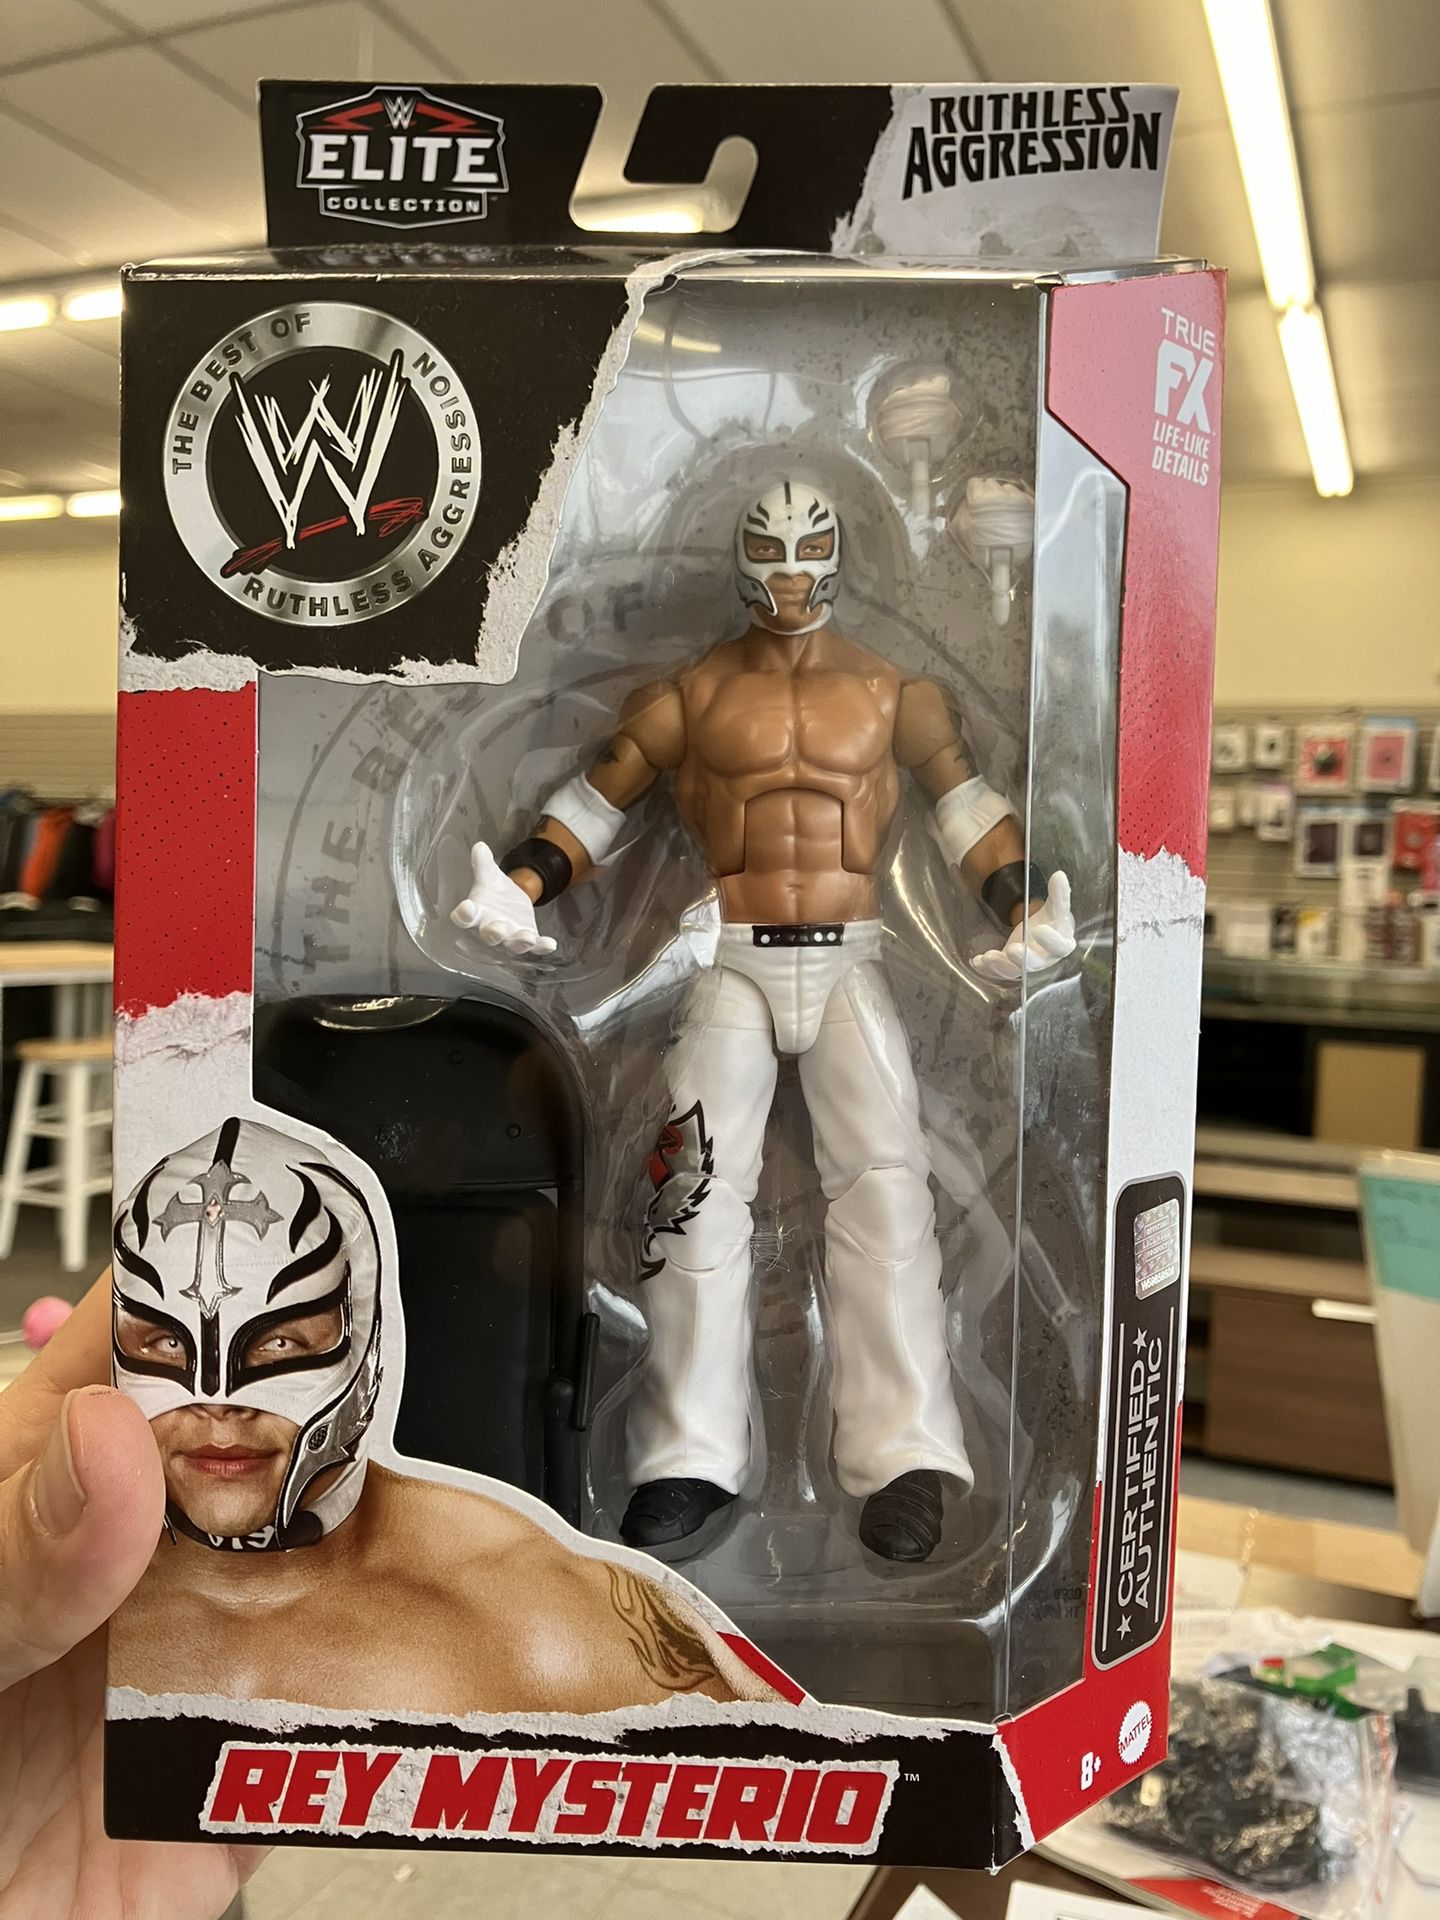 WWE Rey Mysterio Best of Ruthless Aggression Elite Collection Action Figure with Accessory, New